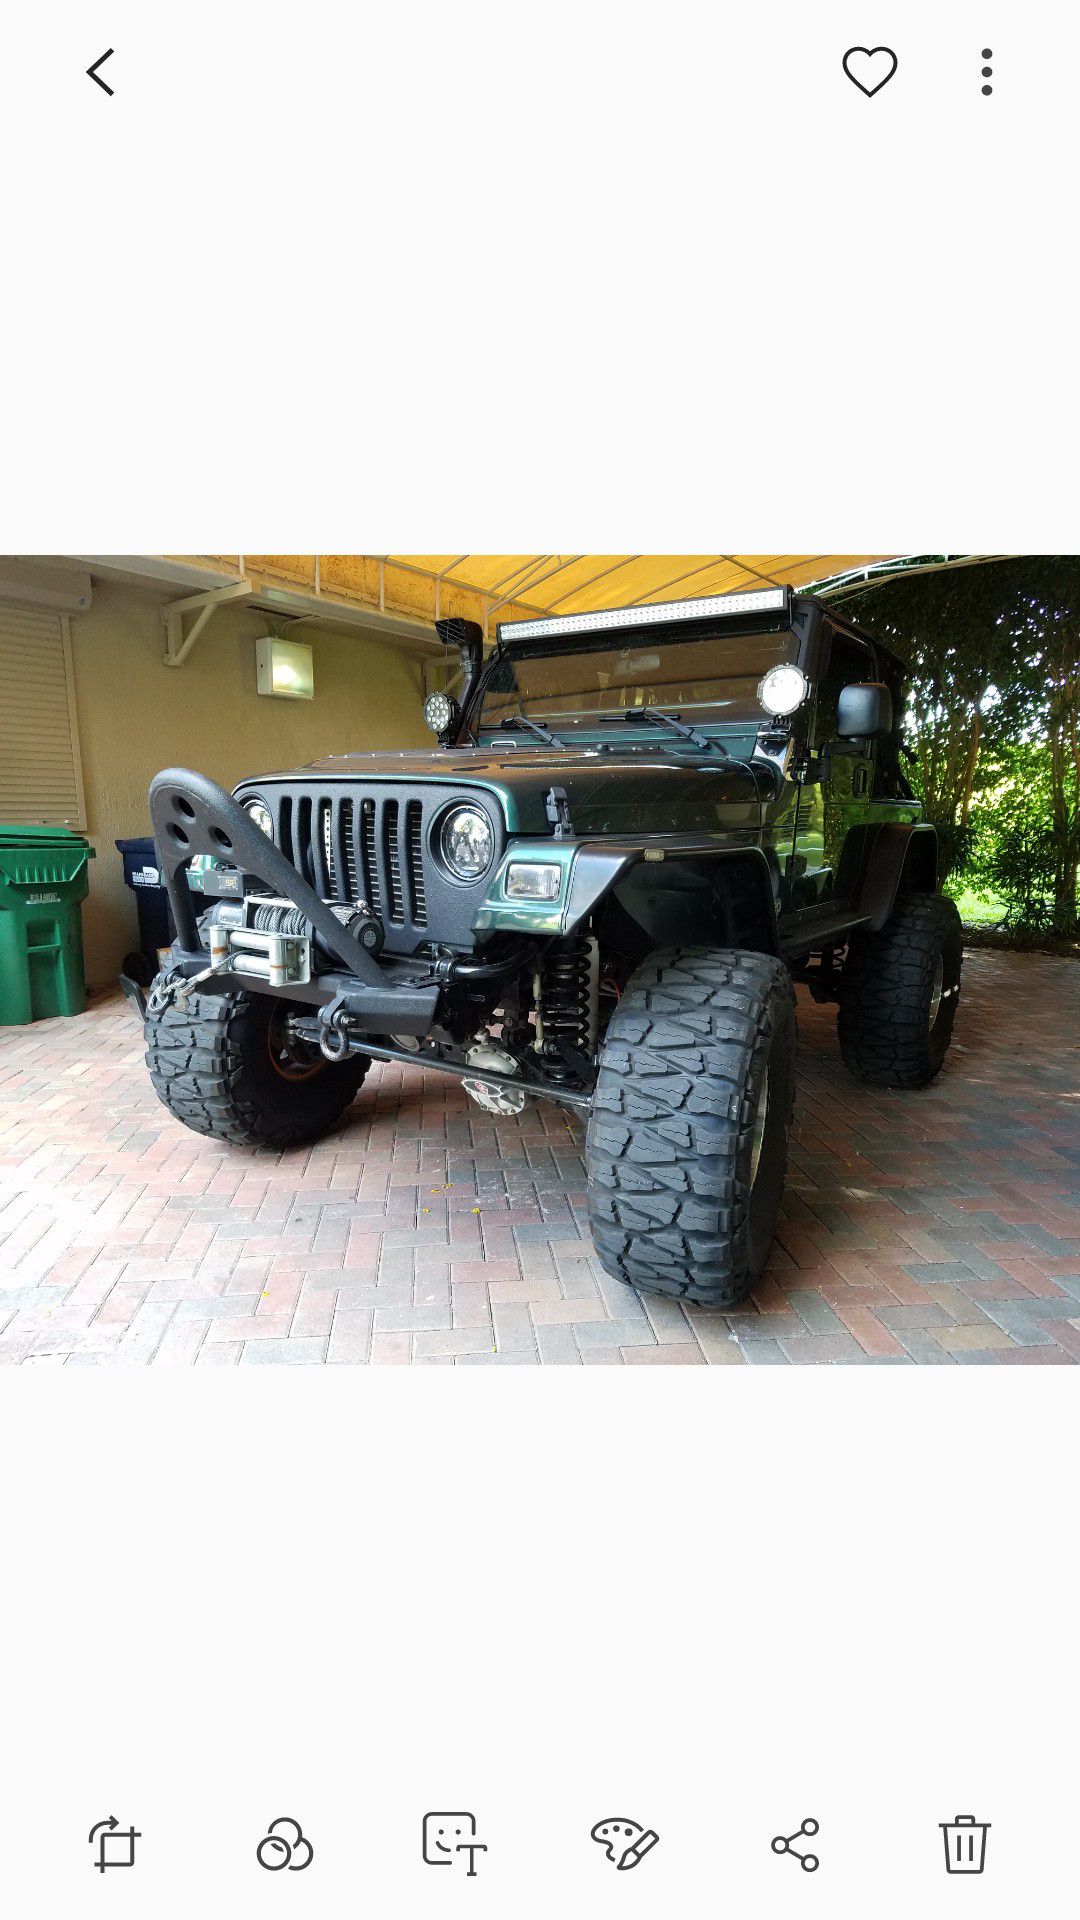 Jeep Wrangler 2001 TJ 115k miles. 4.0 6cyl manual trans. Custom arms. G2 gearing. 38 Nitto grabbers